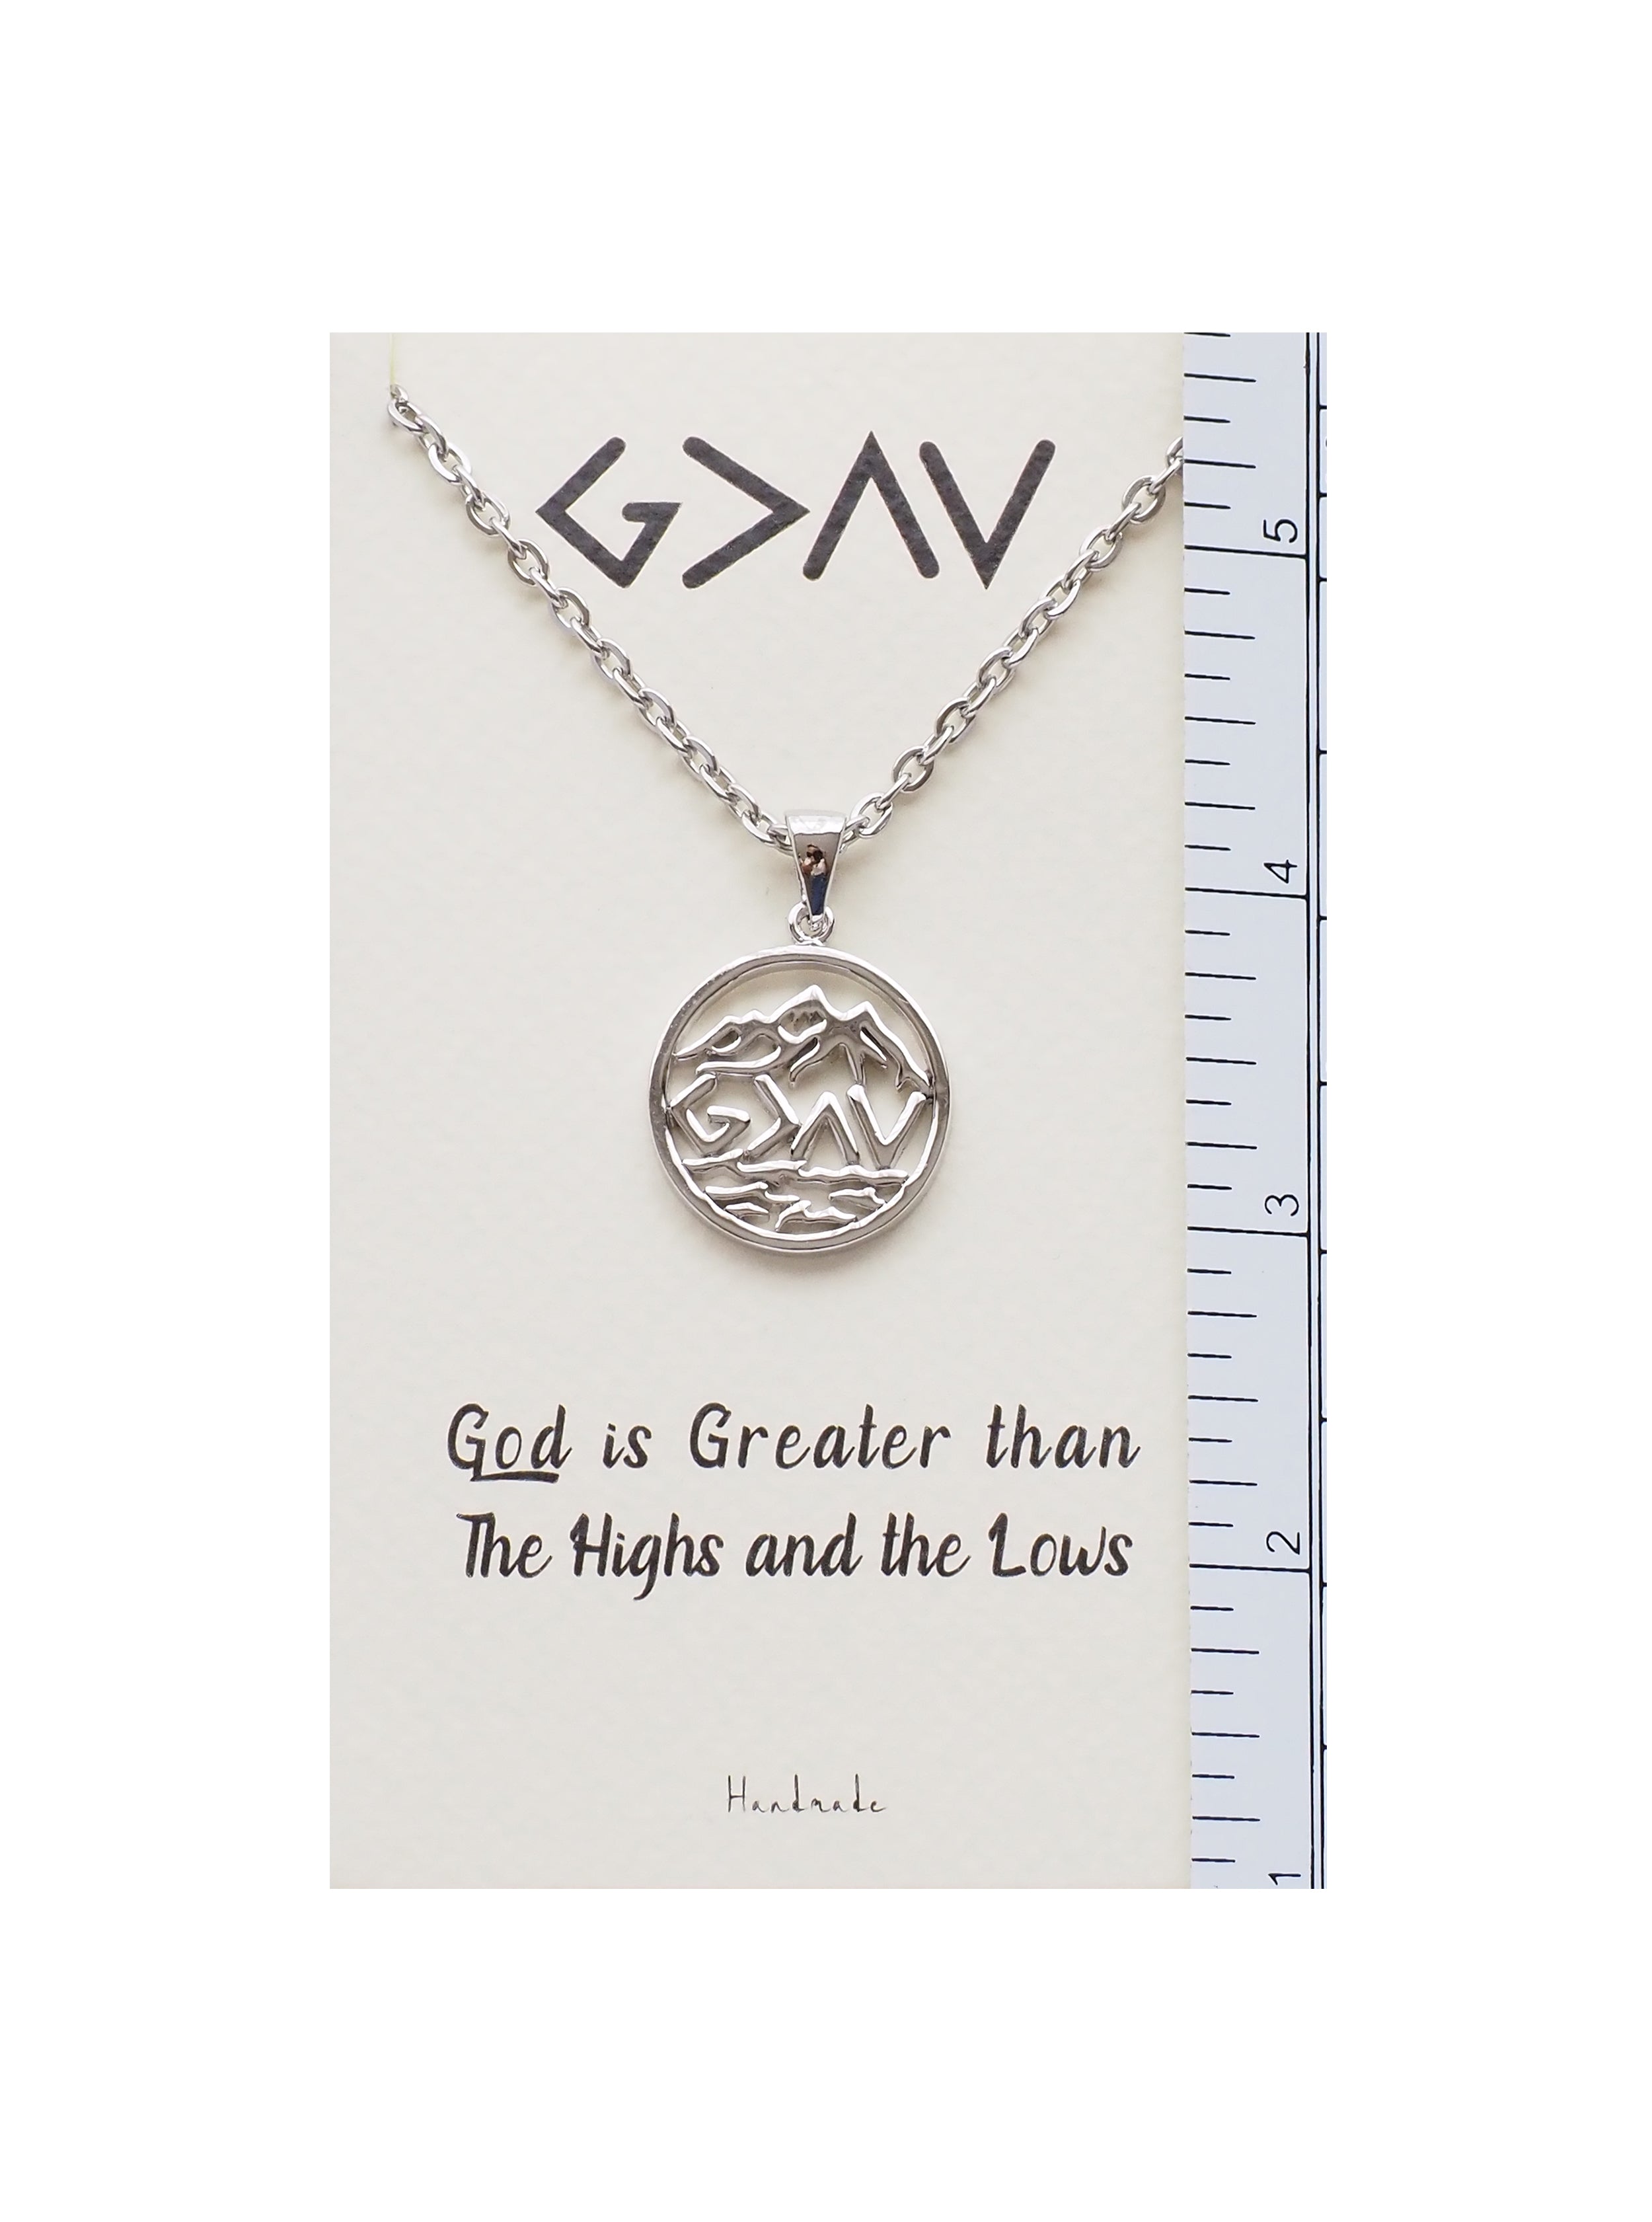 Joyfulle Ria God is Greater than High and Lows Mountain Pendant Necklace, Handmade Gifts for Women with Inspirational Greeting Card